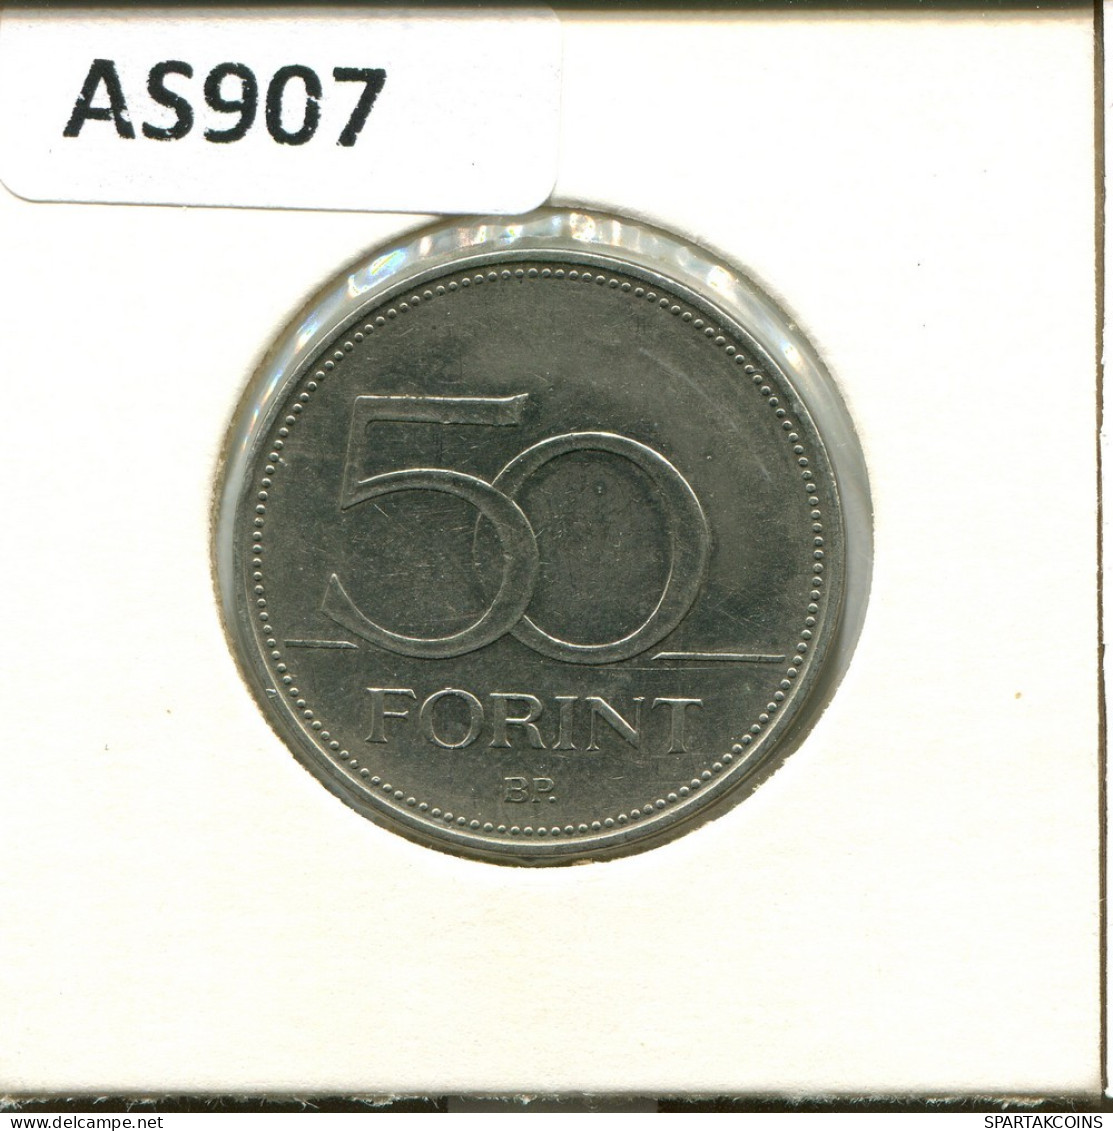 50 FORINT 1995 HUNGARY Coin #AS907.U.A - Ungarn